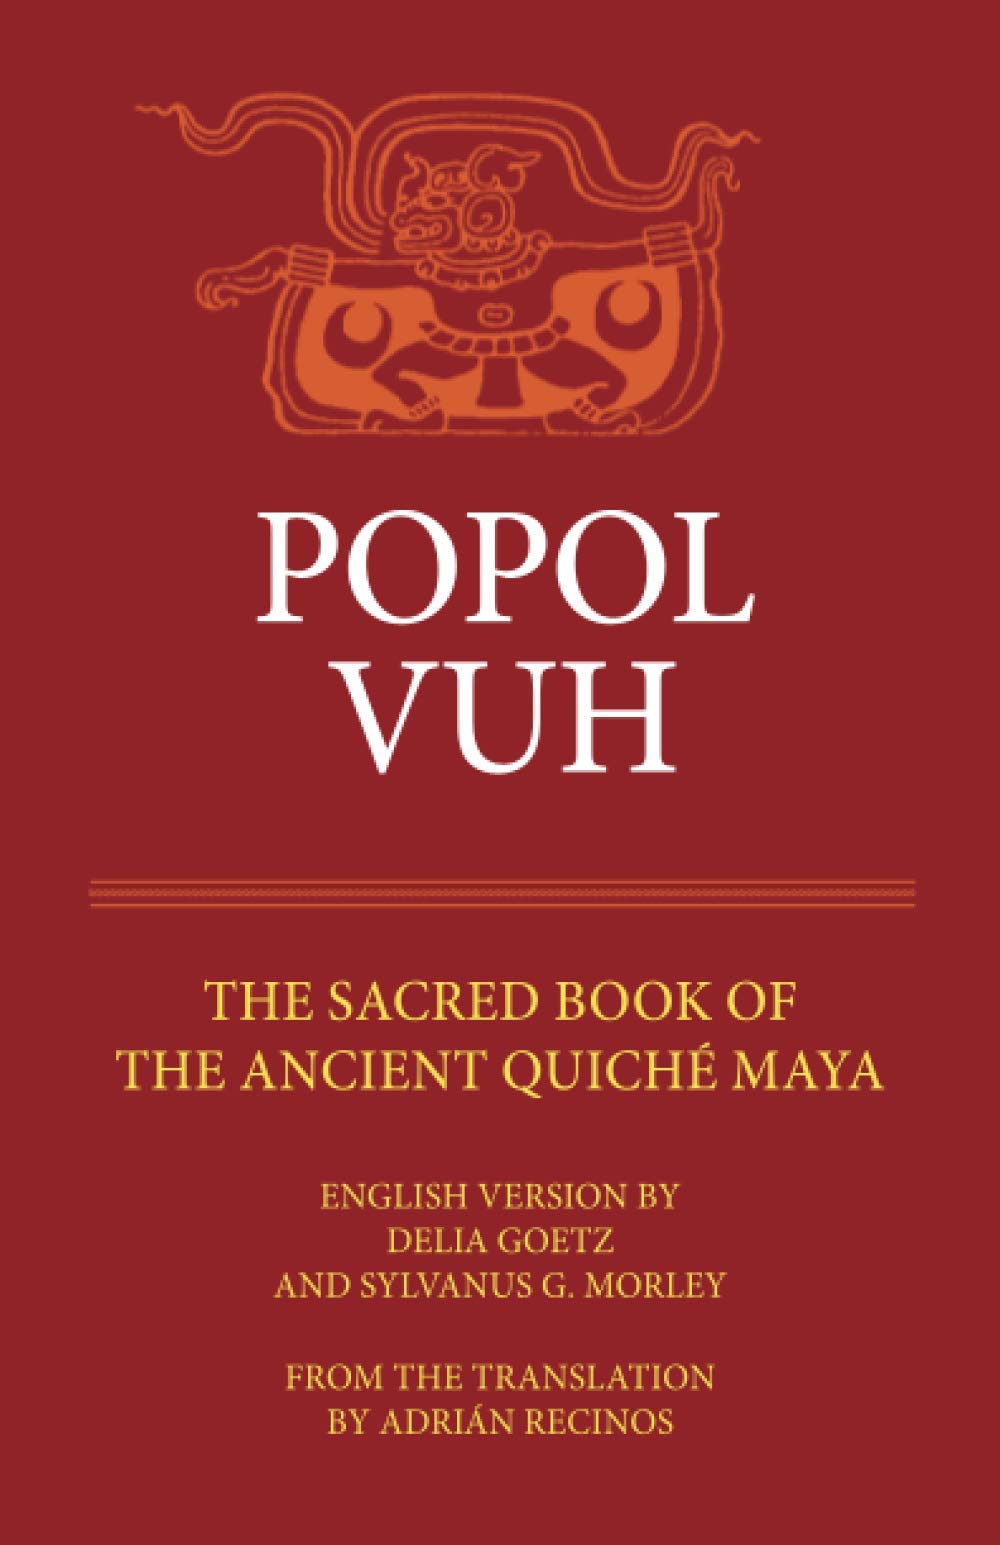 Popol Vuh: The Sacred Book of the Ancient Quiche Maya, Volume 29, The Civilization of the American Indian Series - (Paperback)